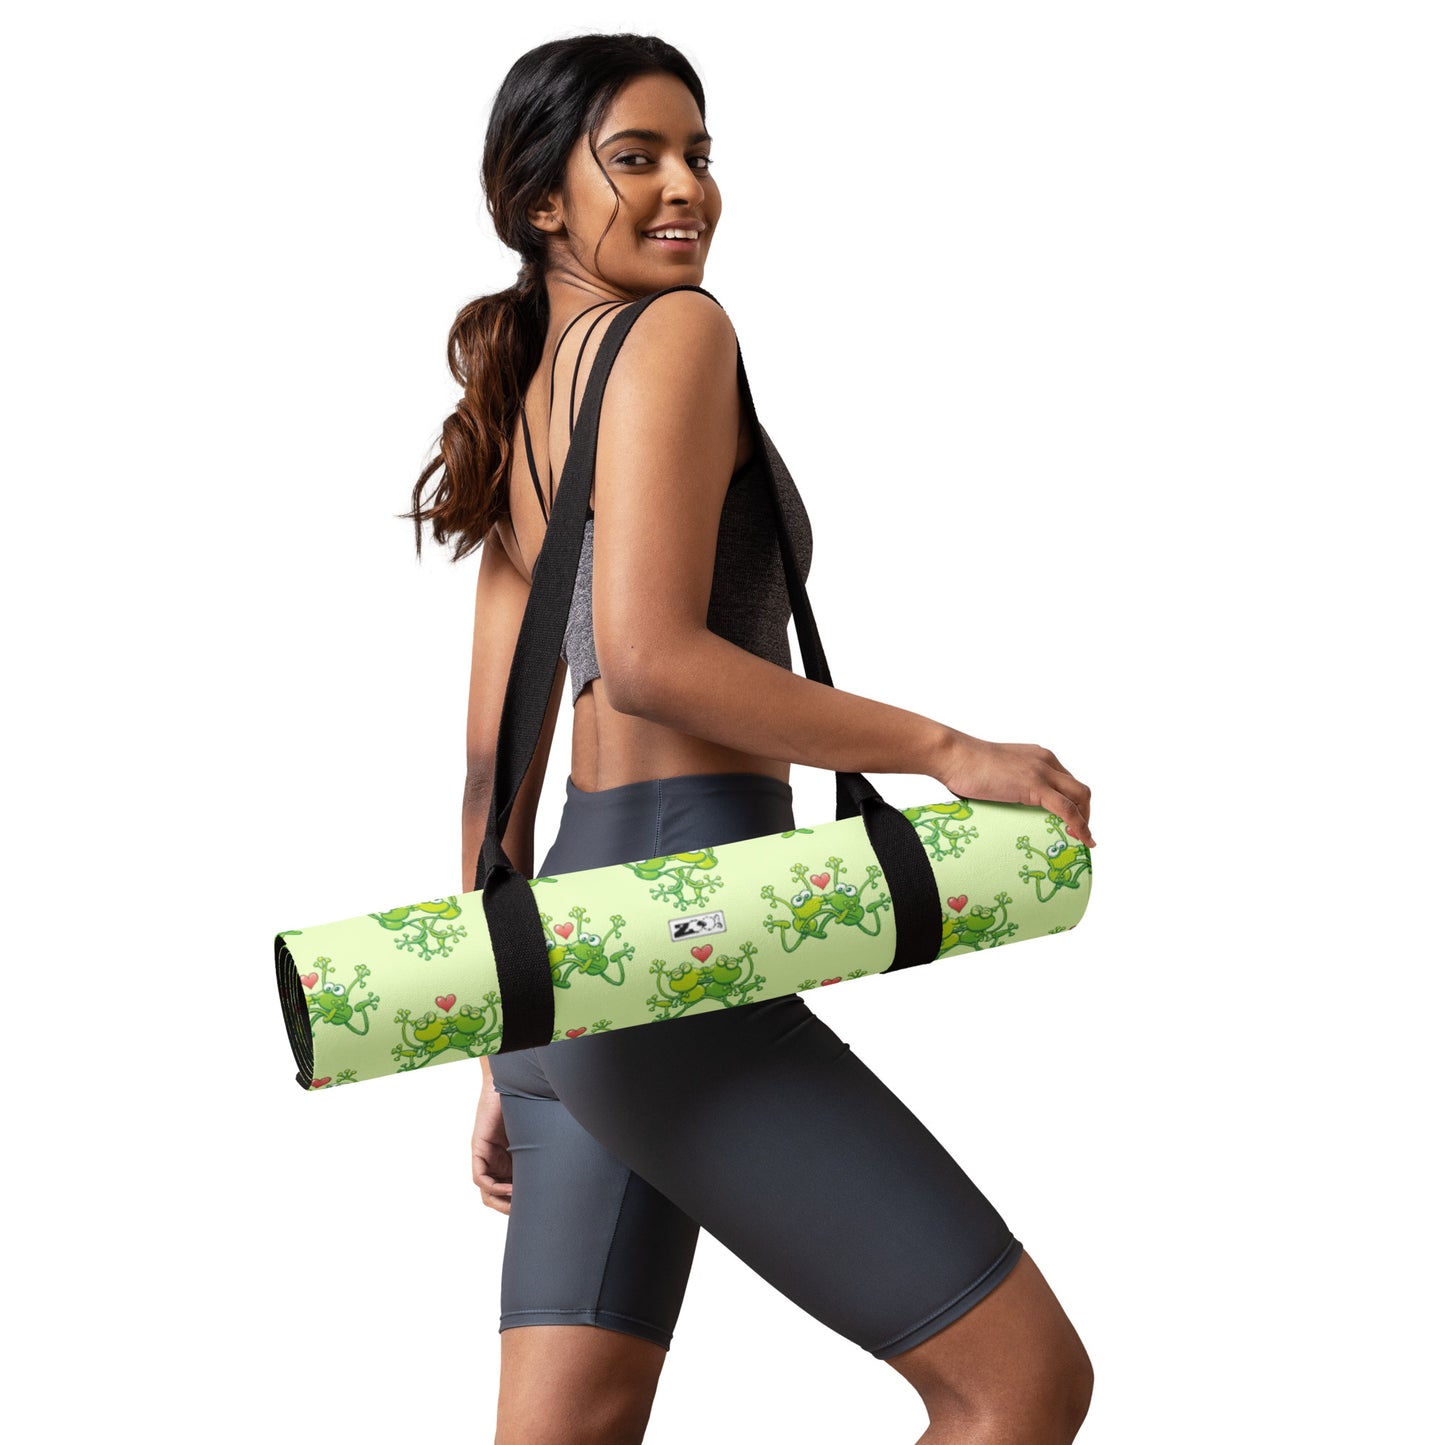 Green frogs are calling for love Yoga mat. Easy to take everywhere